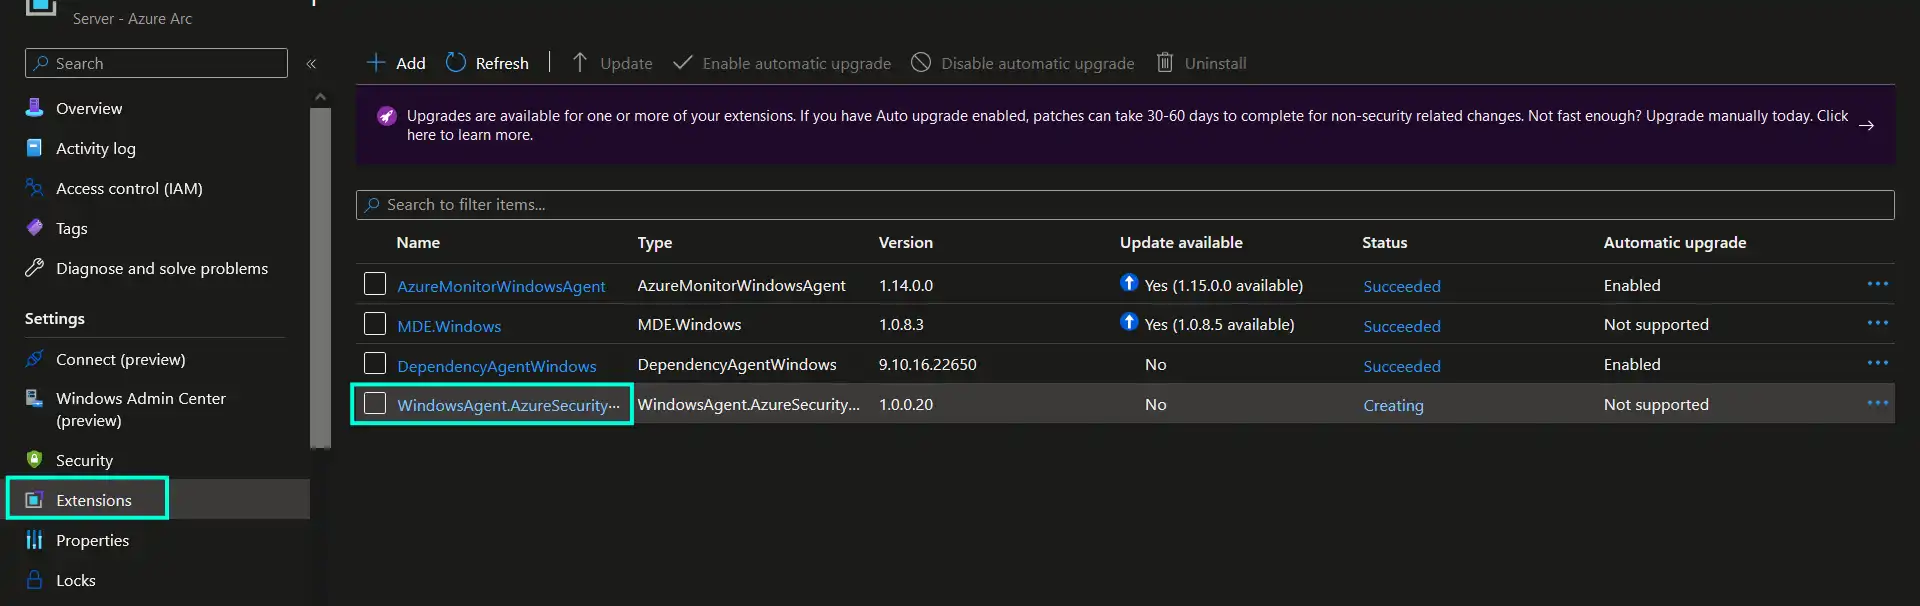 Screenshot of how Qualys extension looks like in Azure Arc-enabled servers extension list in Azure portal